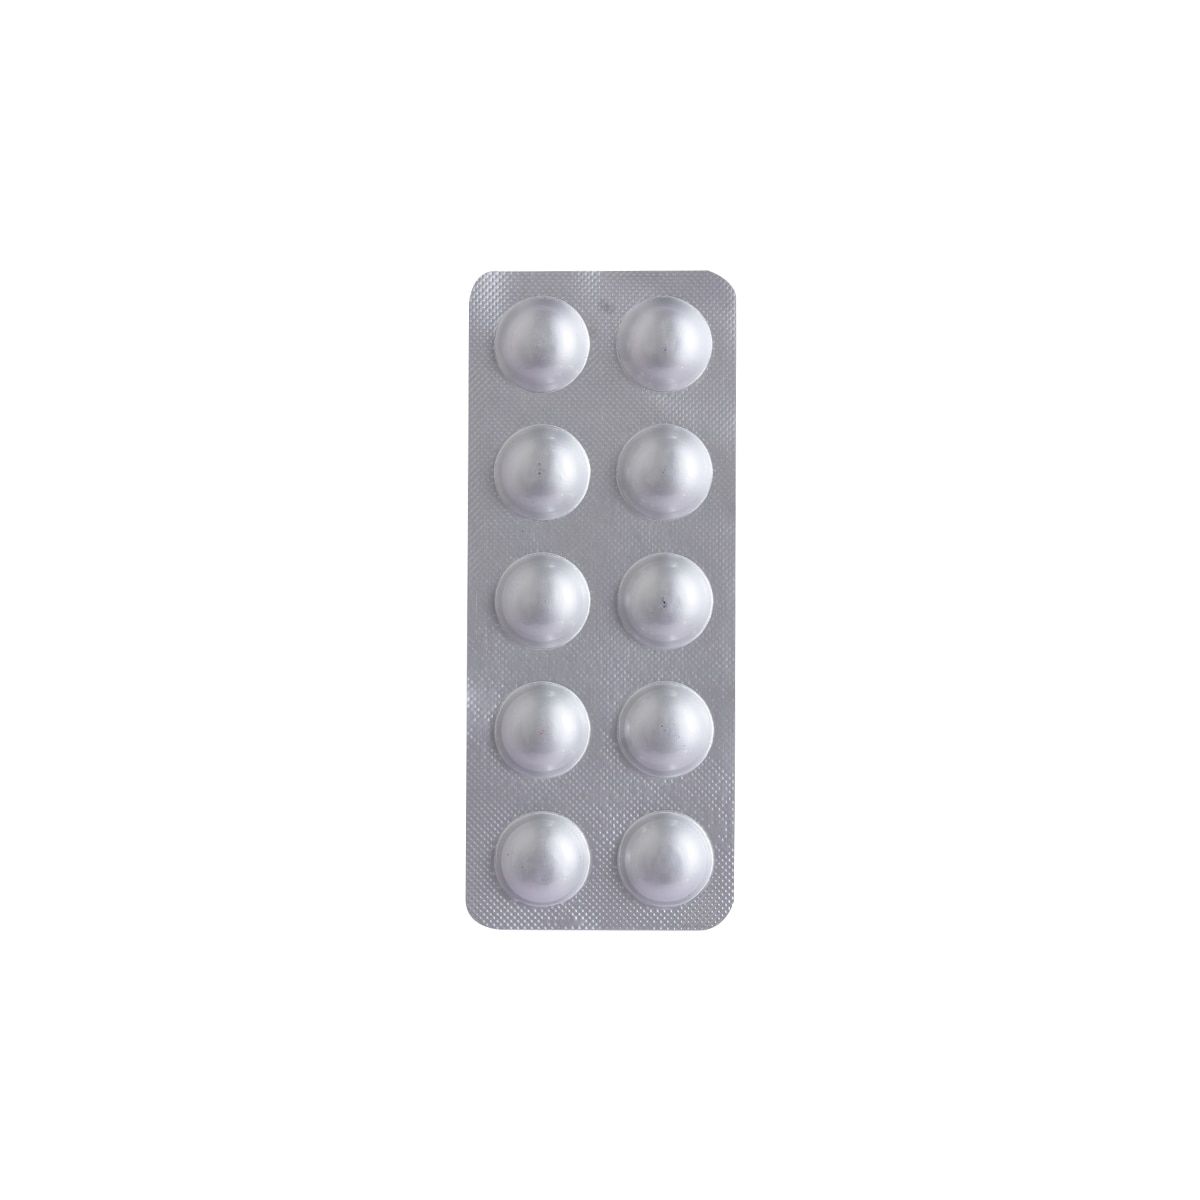 Costrova M Tablet 10's, Pack of 10 TABLETS